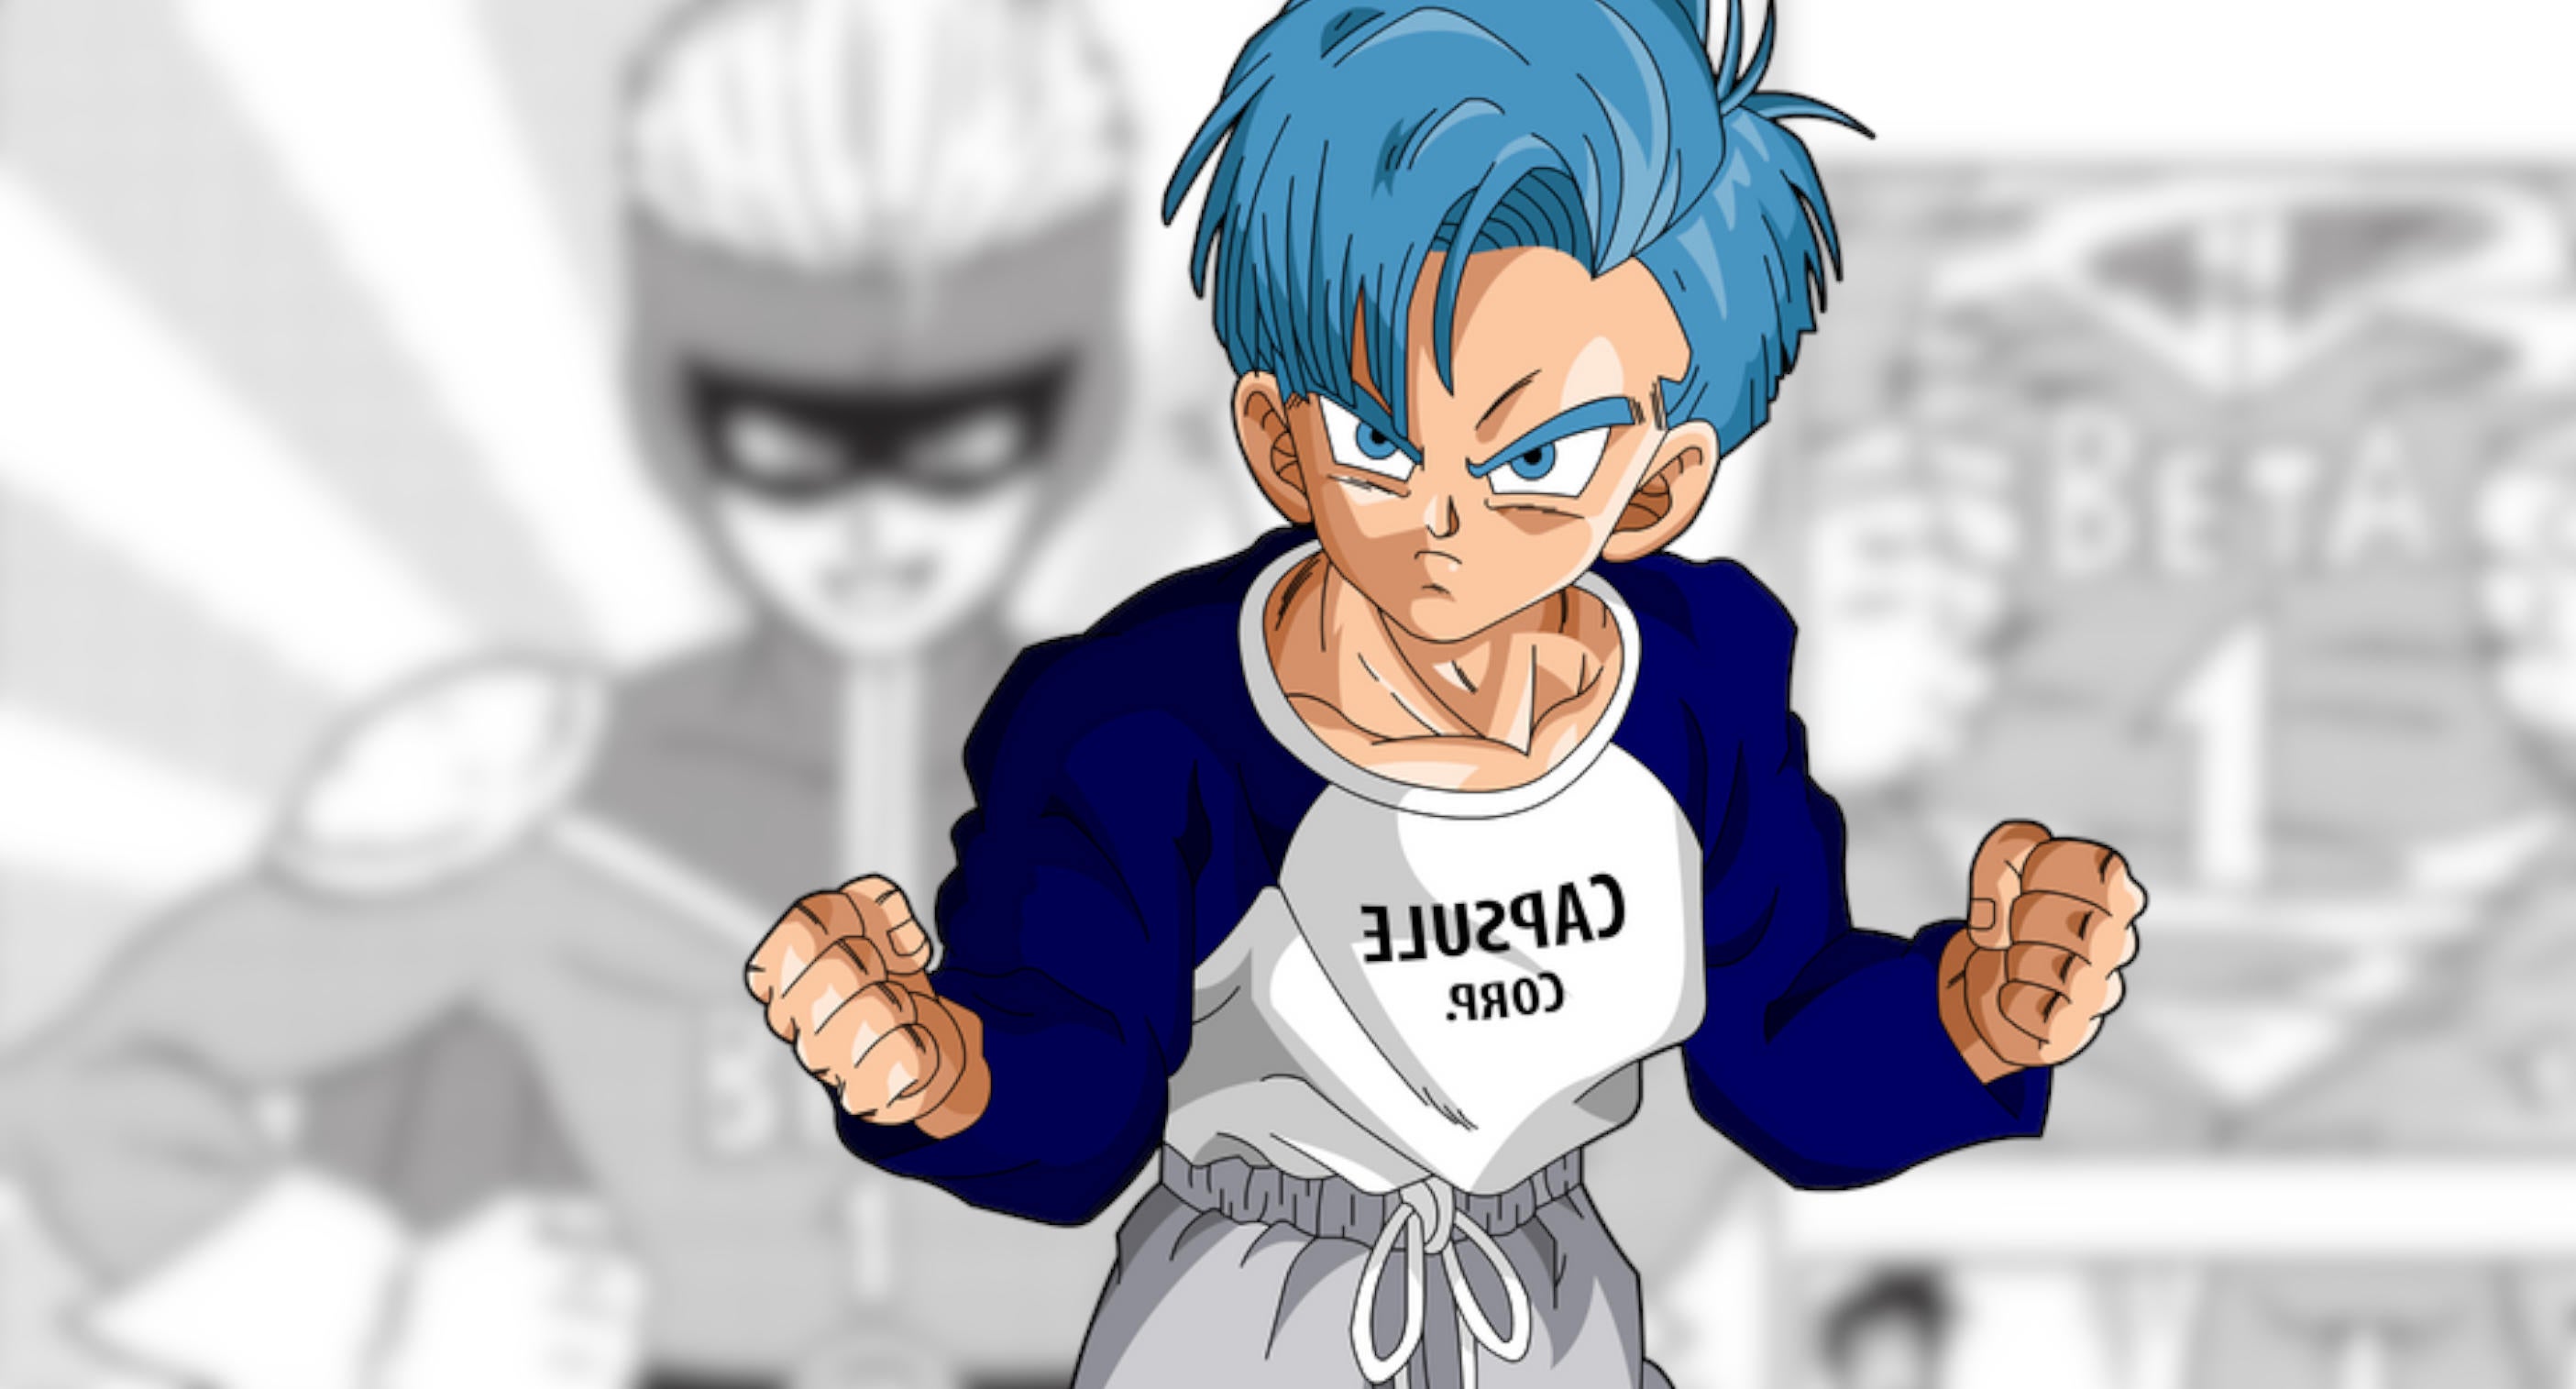 Future Wallpaper Png - Anime Dragon Ball Super Trunks Cosplay Costume  Aa.0261 - Free Transparent PNG Download - PNGkey